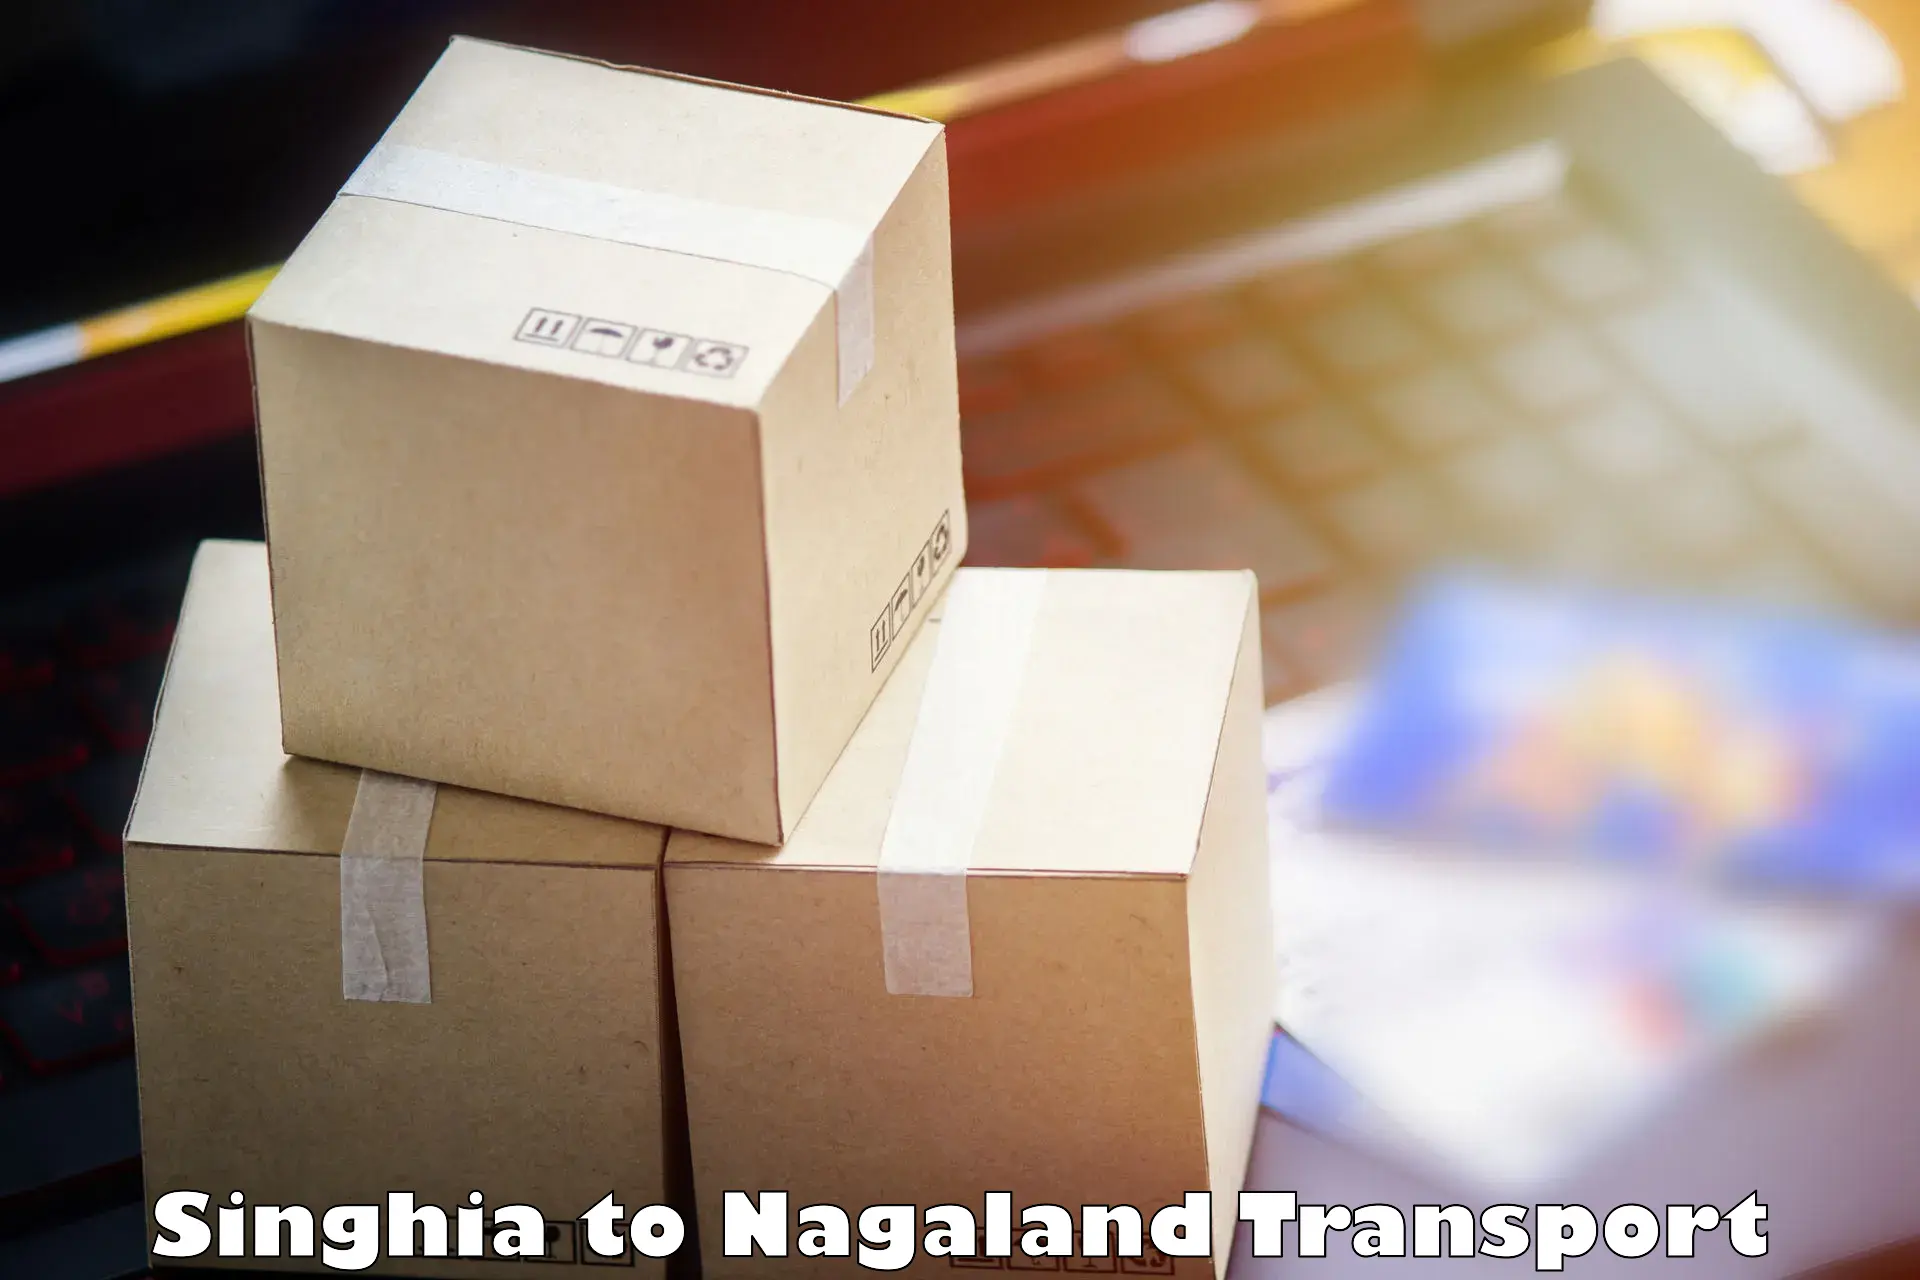 Container transport service Singhia to Nagaland